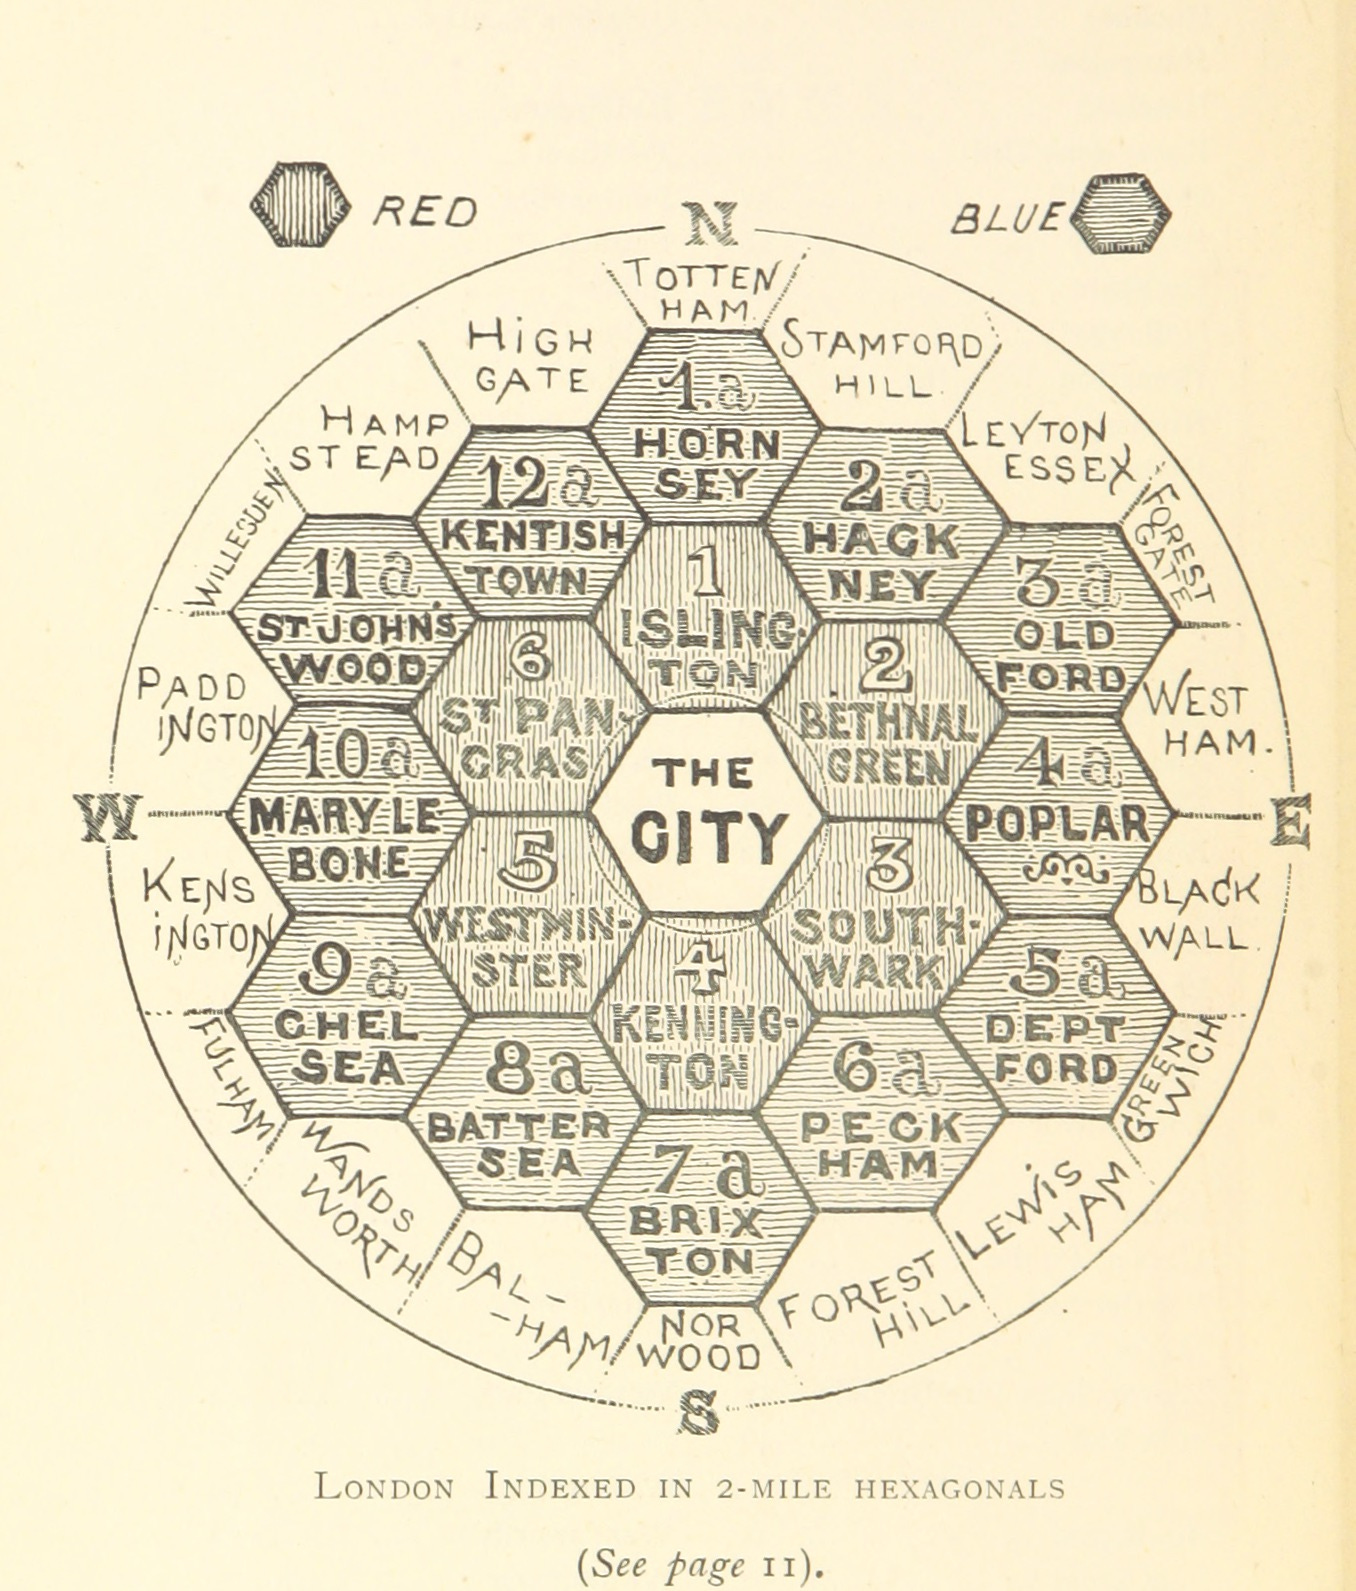 Hexagonal Map of London - from “The Unification of London: The Need and the Remedy” by John Leighton - published in 1895.